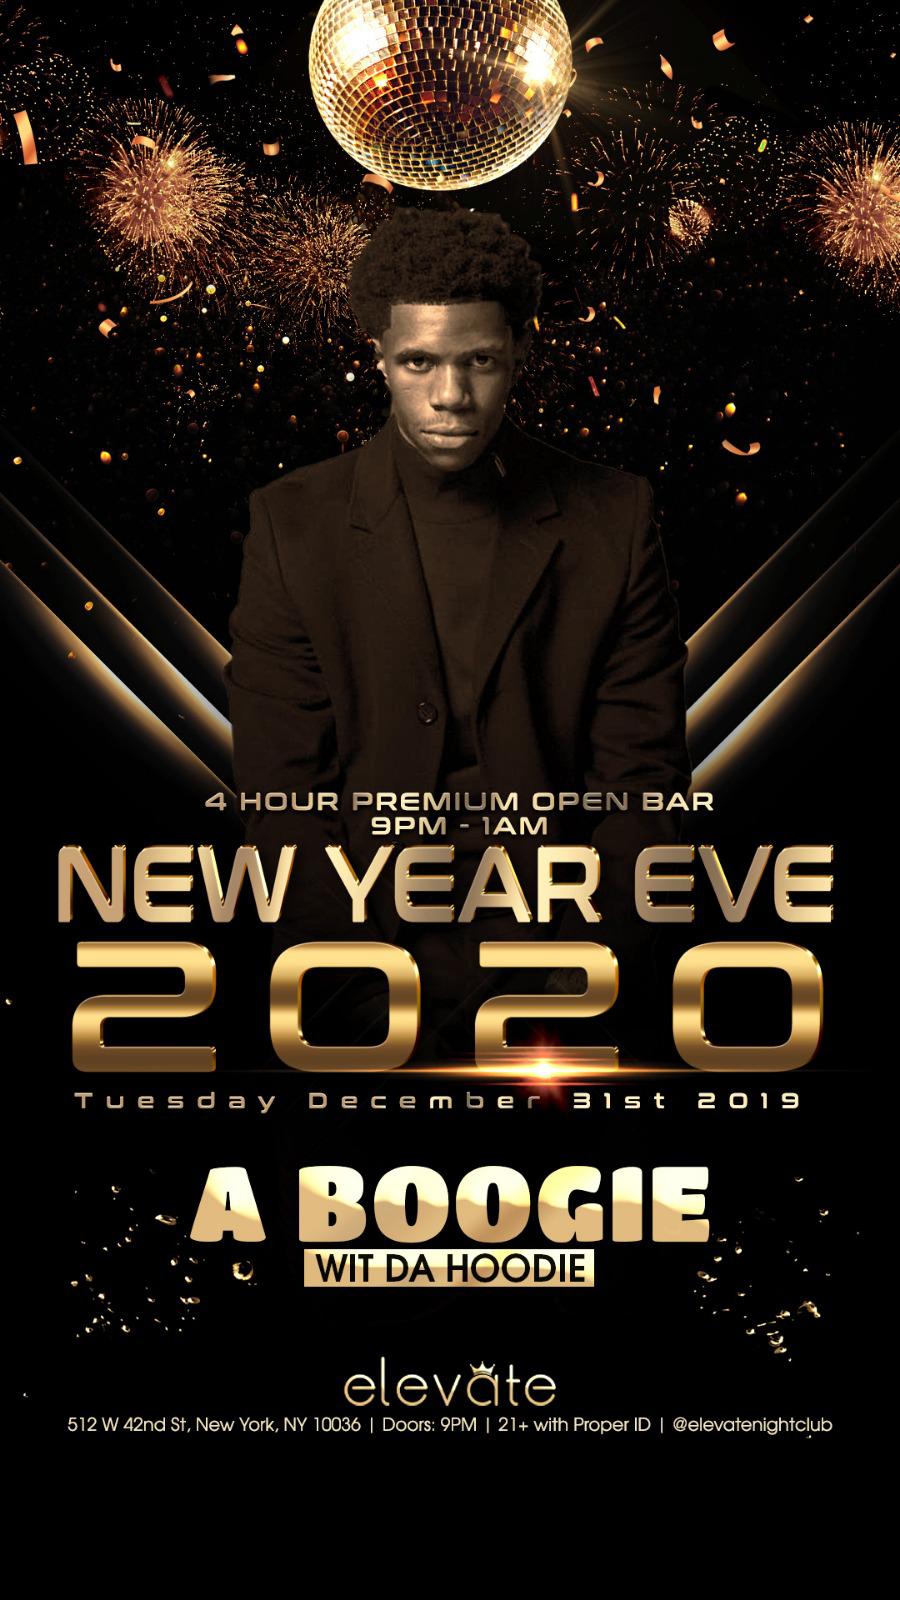 A Boogie's New Year's Eve 2020 Celebration at Elevate NYC / 4-hrs Open Bar